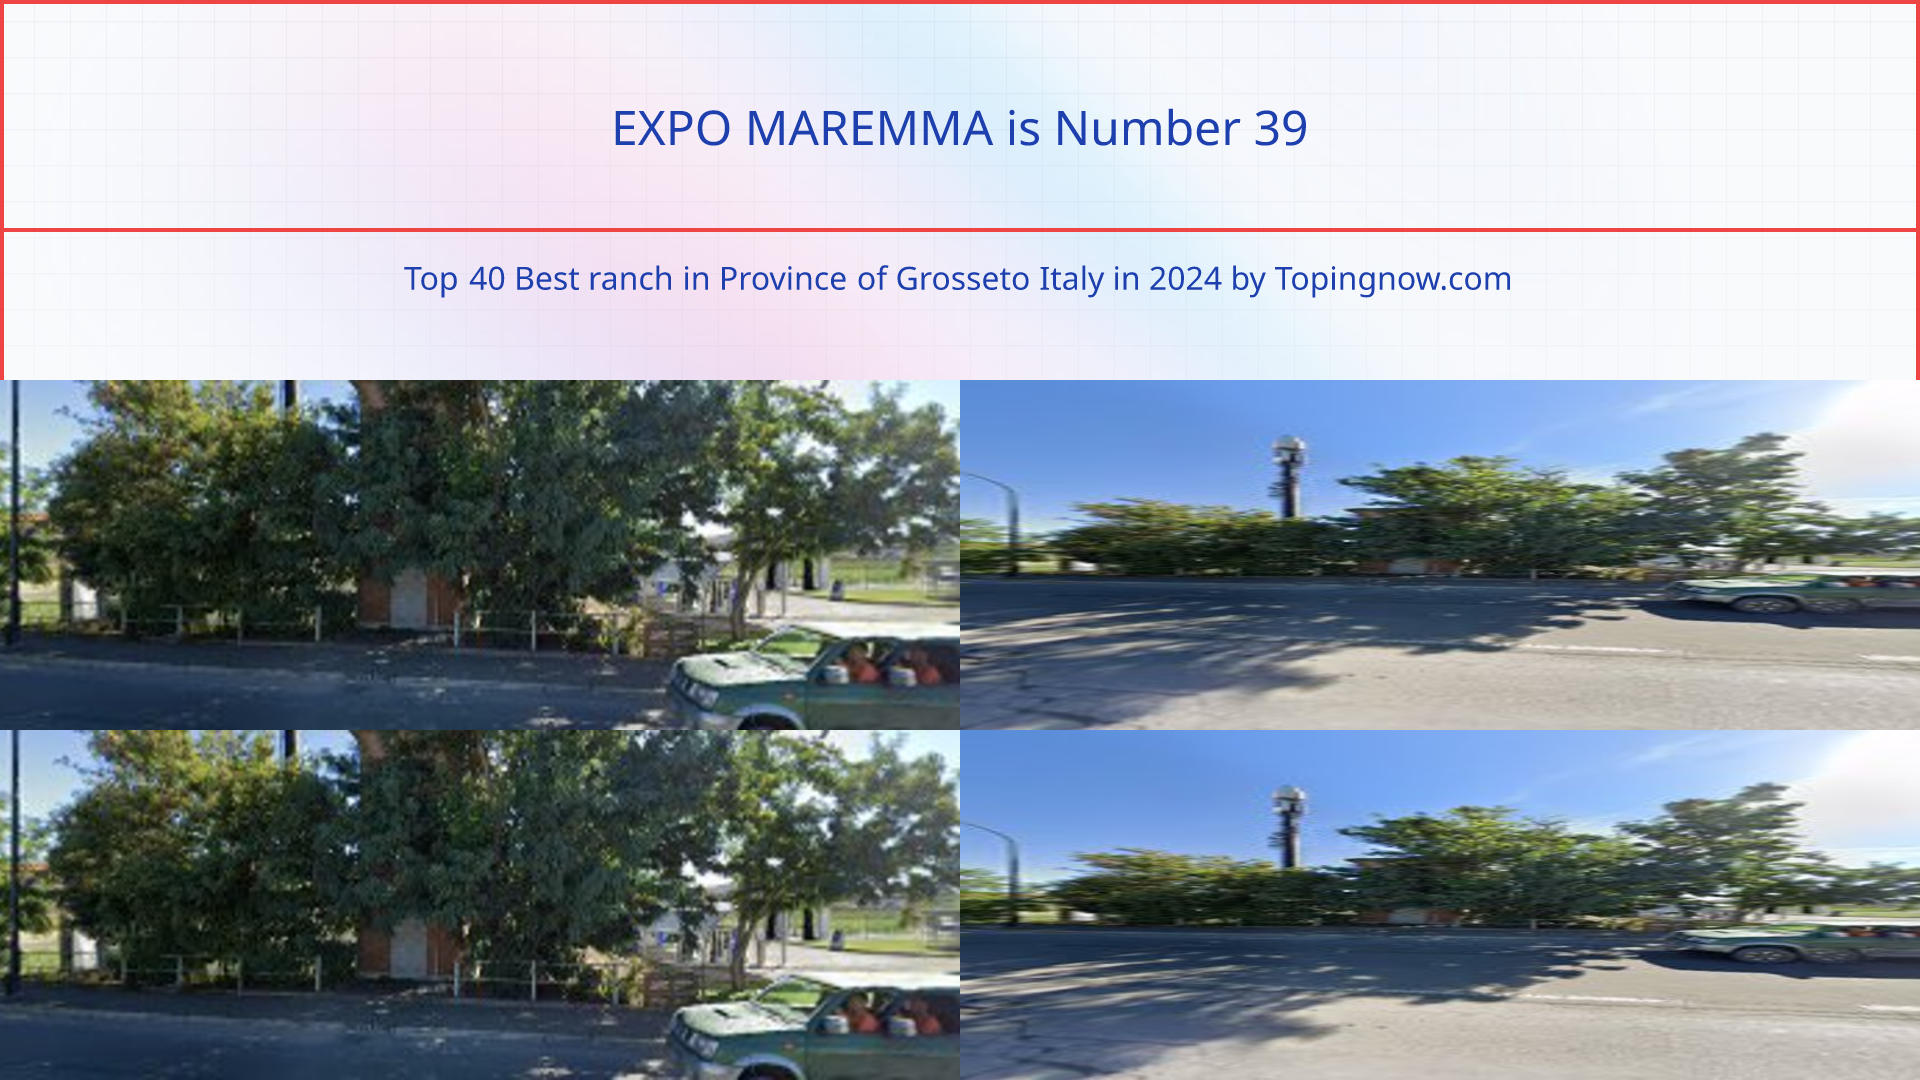 EXPO MAREMMA: Top 40 Best ranch in Province of Grosseto Italy in 2024